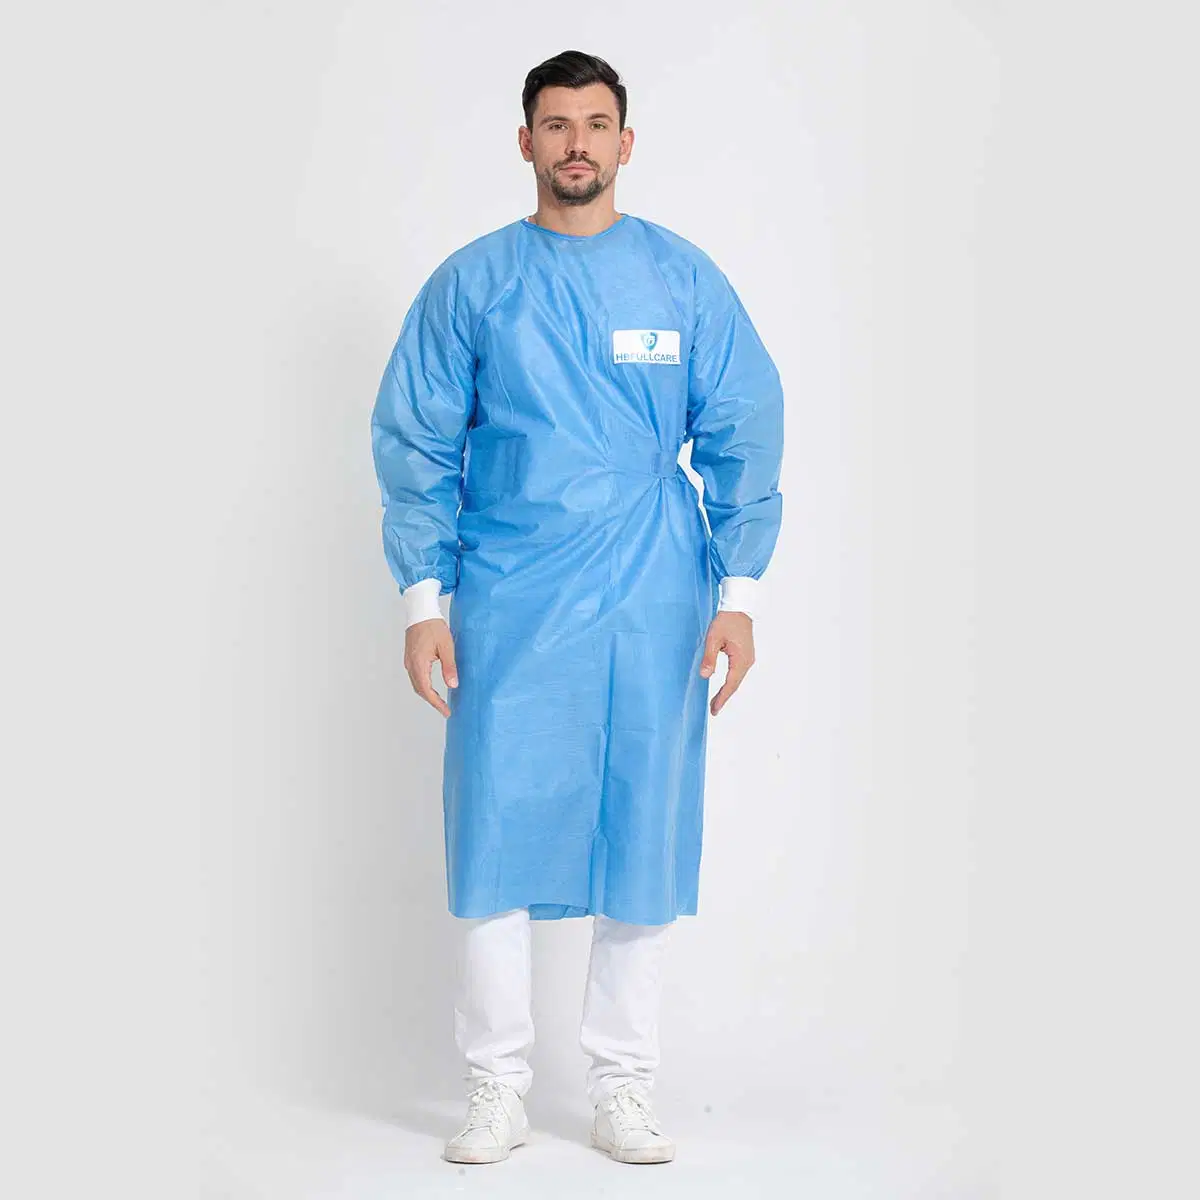 Isolation Gown, Hospital Gown, CPE Gown, Disposable Isolation Gown, Medical Gown, Protective Gown,